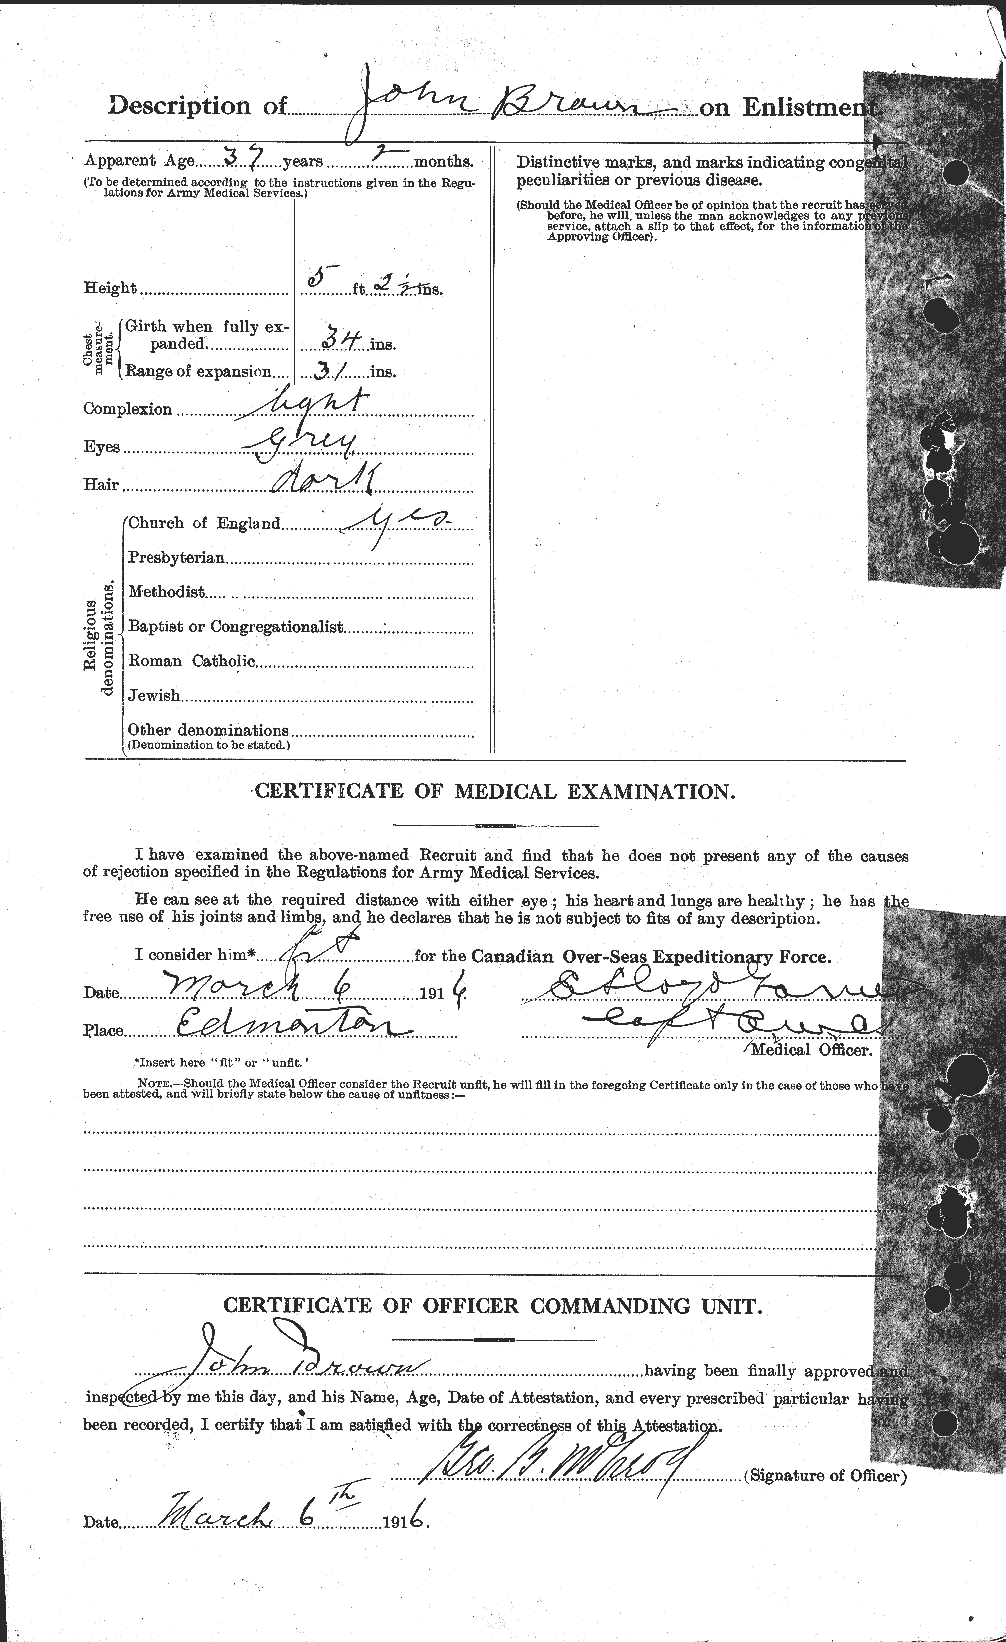 Personnel Records of the First World War - CEF 263897b